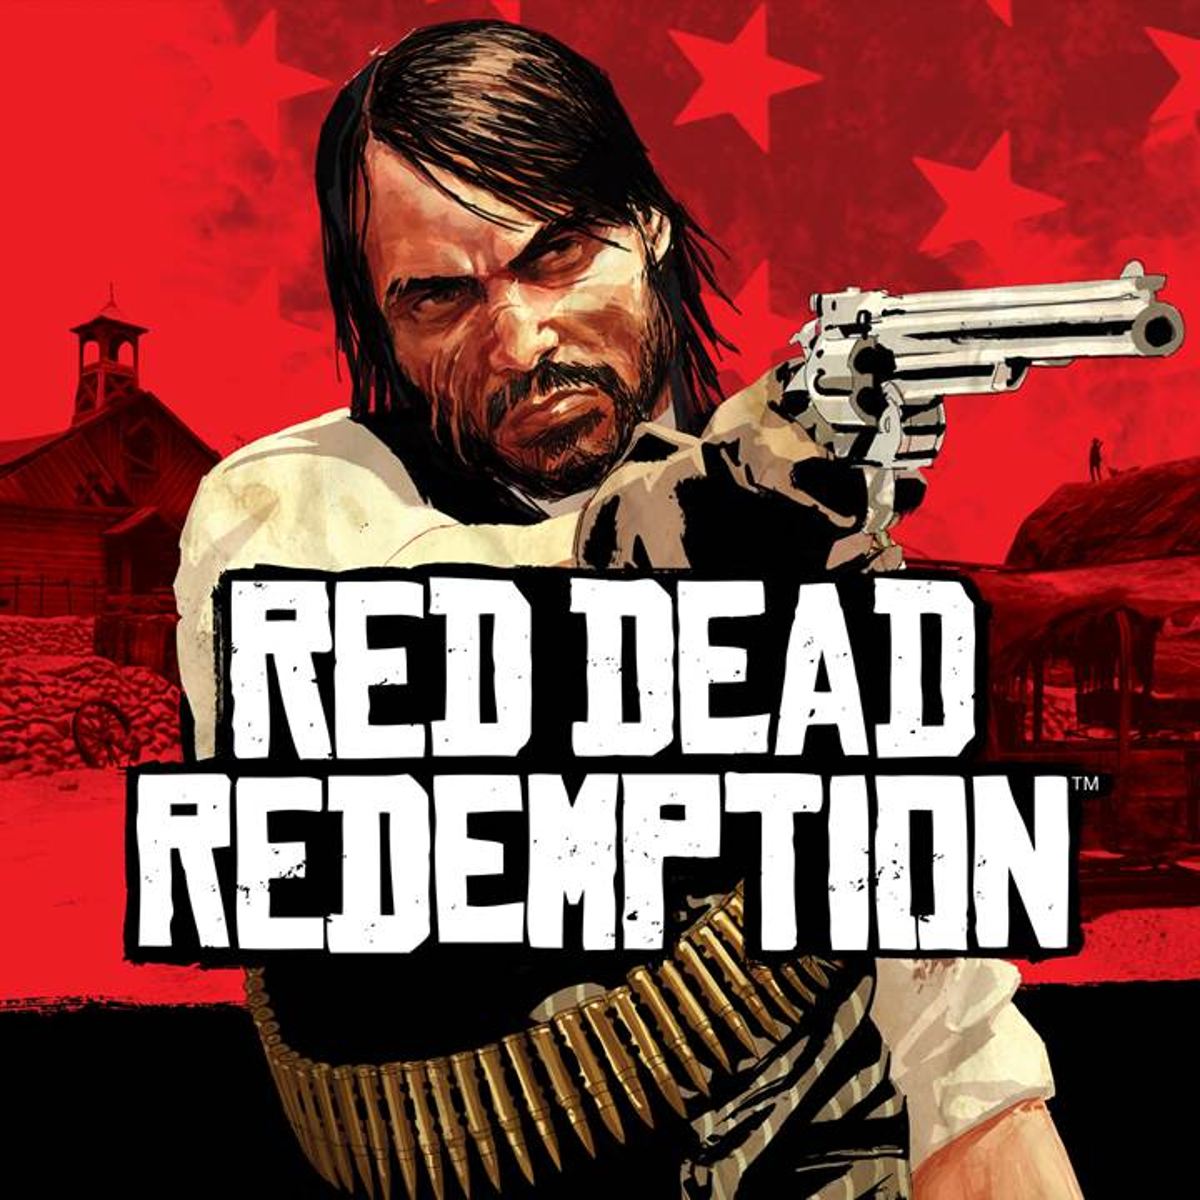 Red Dead Redemption Heads to PS4, PC Through PlayStation Now Next Week -  GameSpot